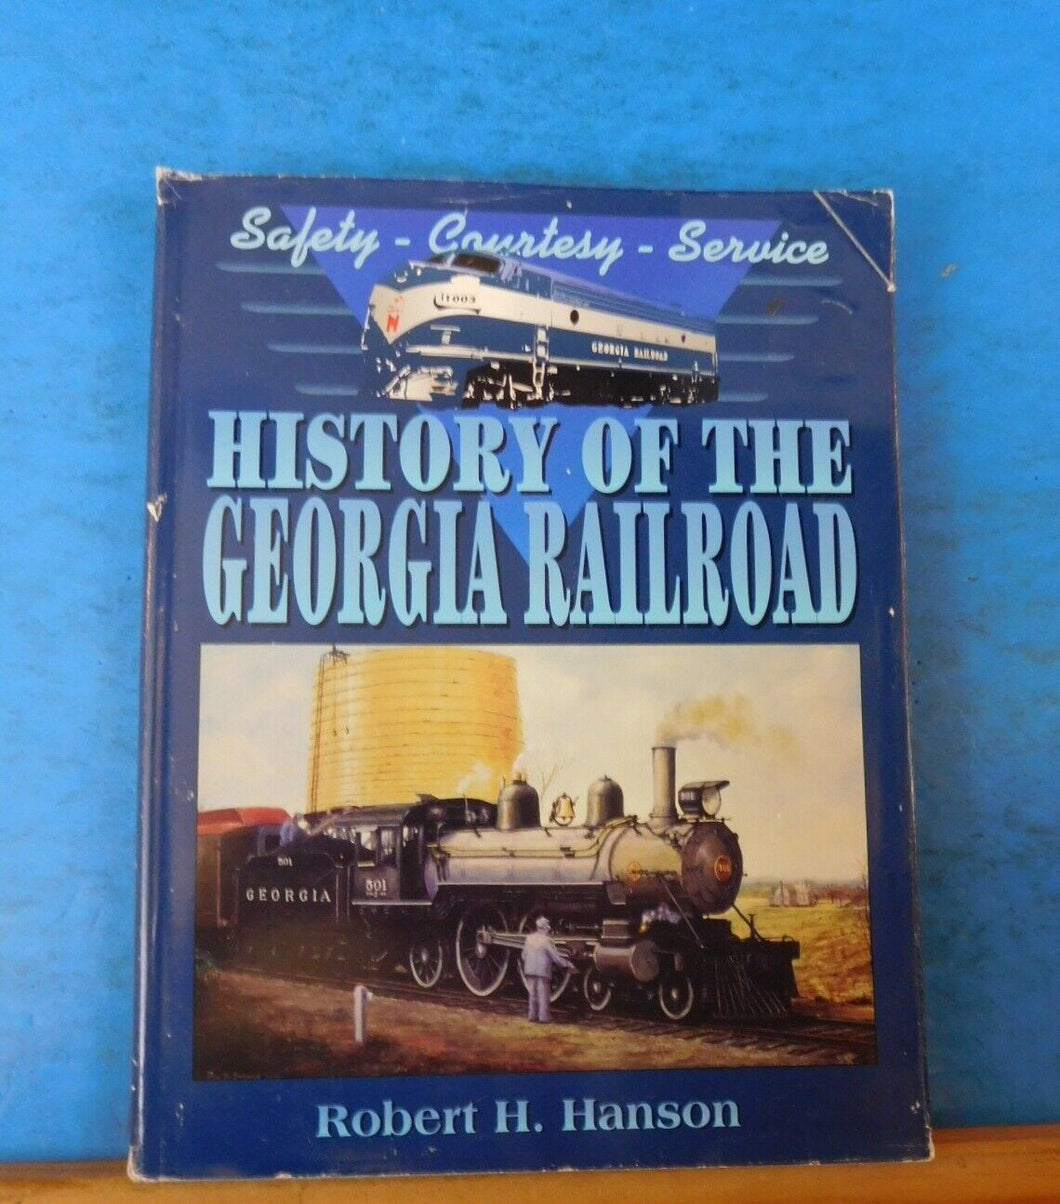 History of the Georgia Railroad by Robert Hanson with dust jacket Copyright 1996